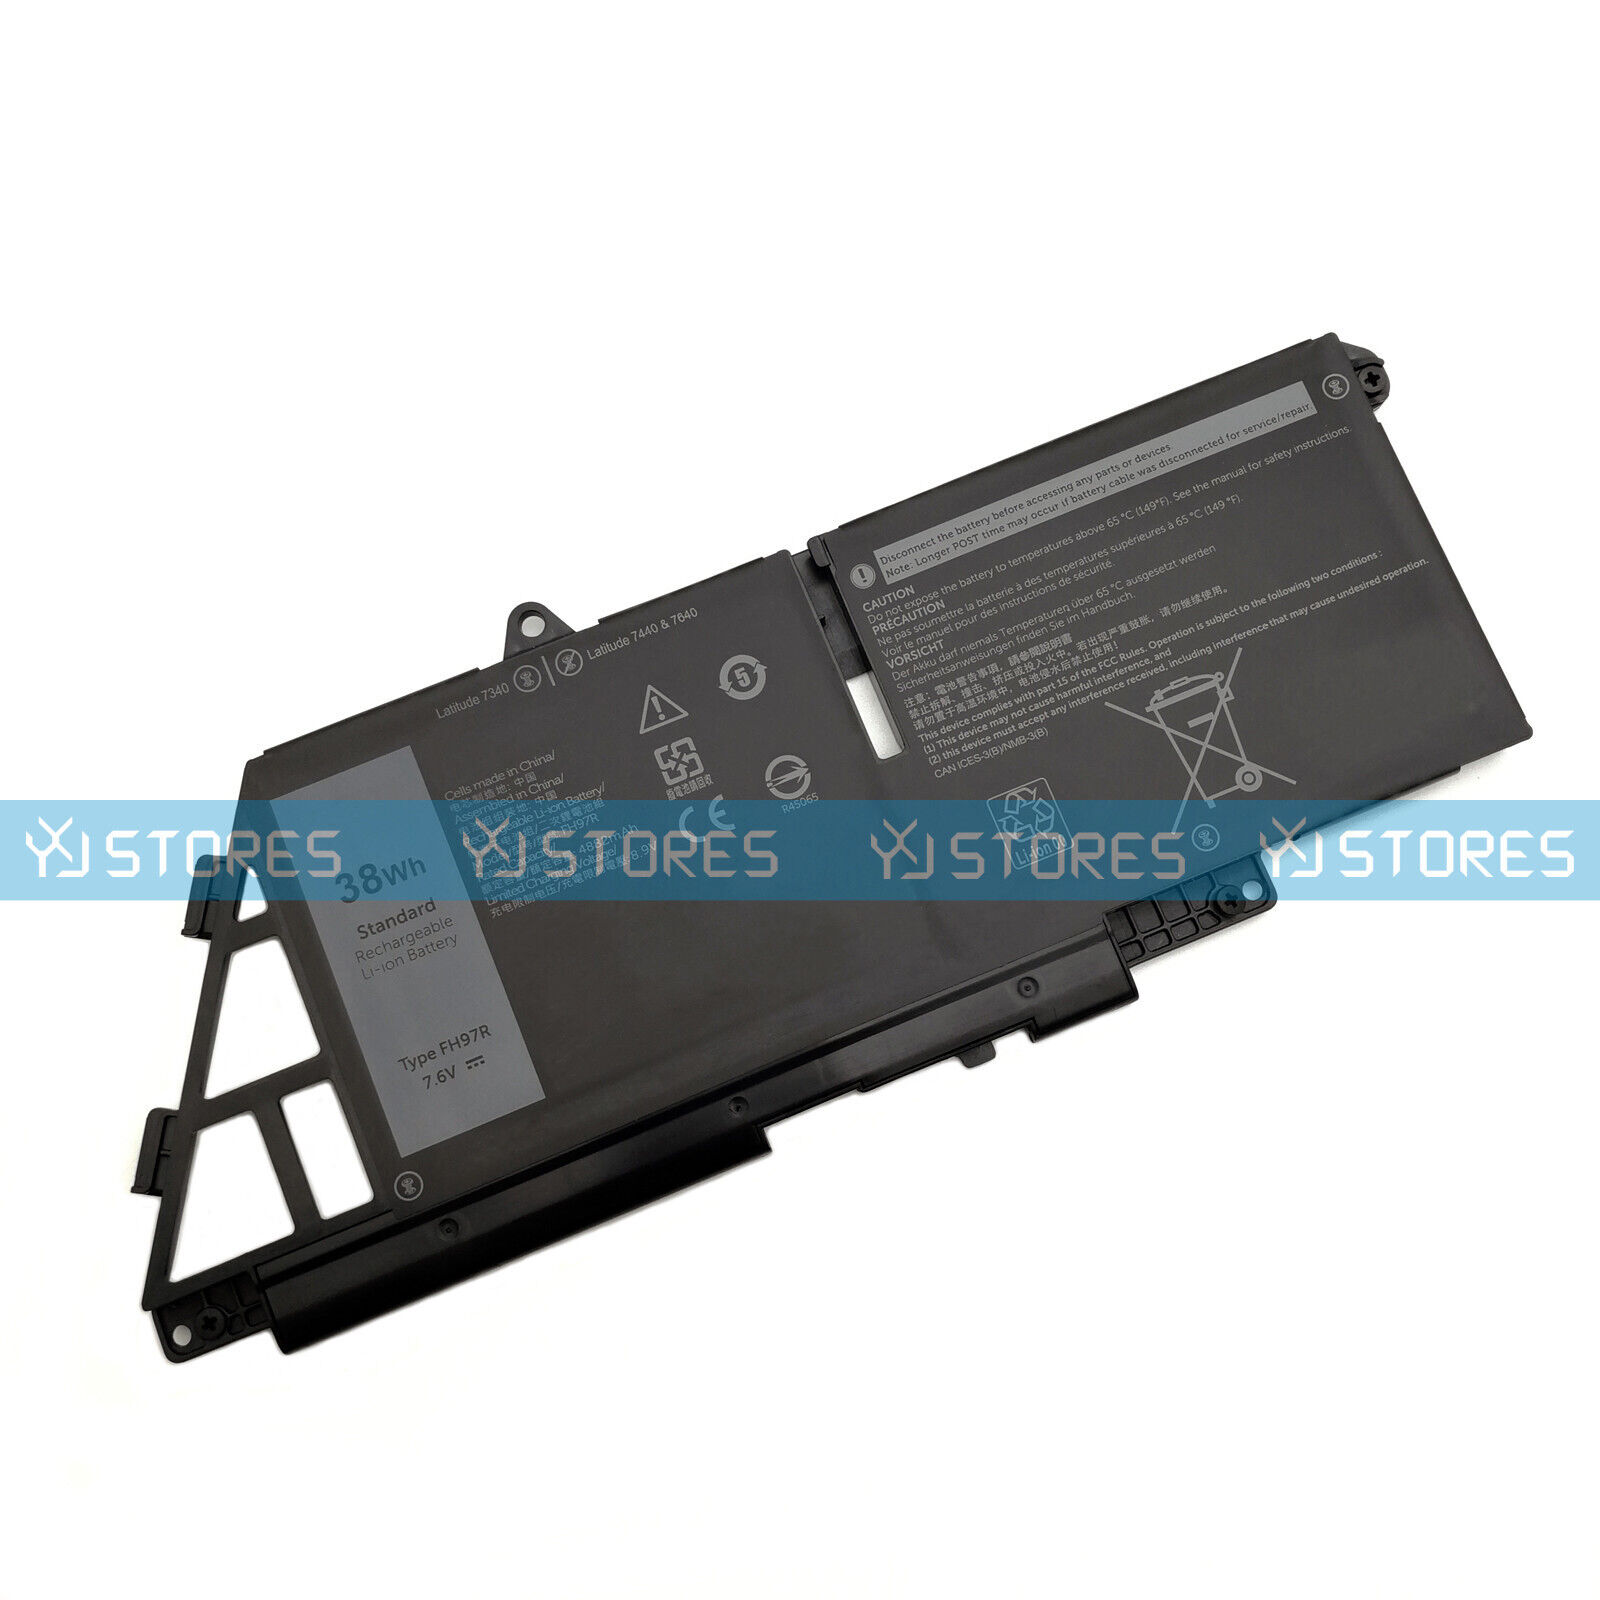 New 599M7 76KVG FH97R Battery for Dell Latitude 7340 7440 7640 P179G P178G001